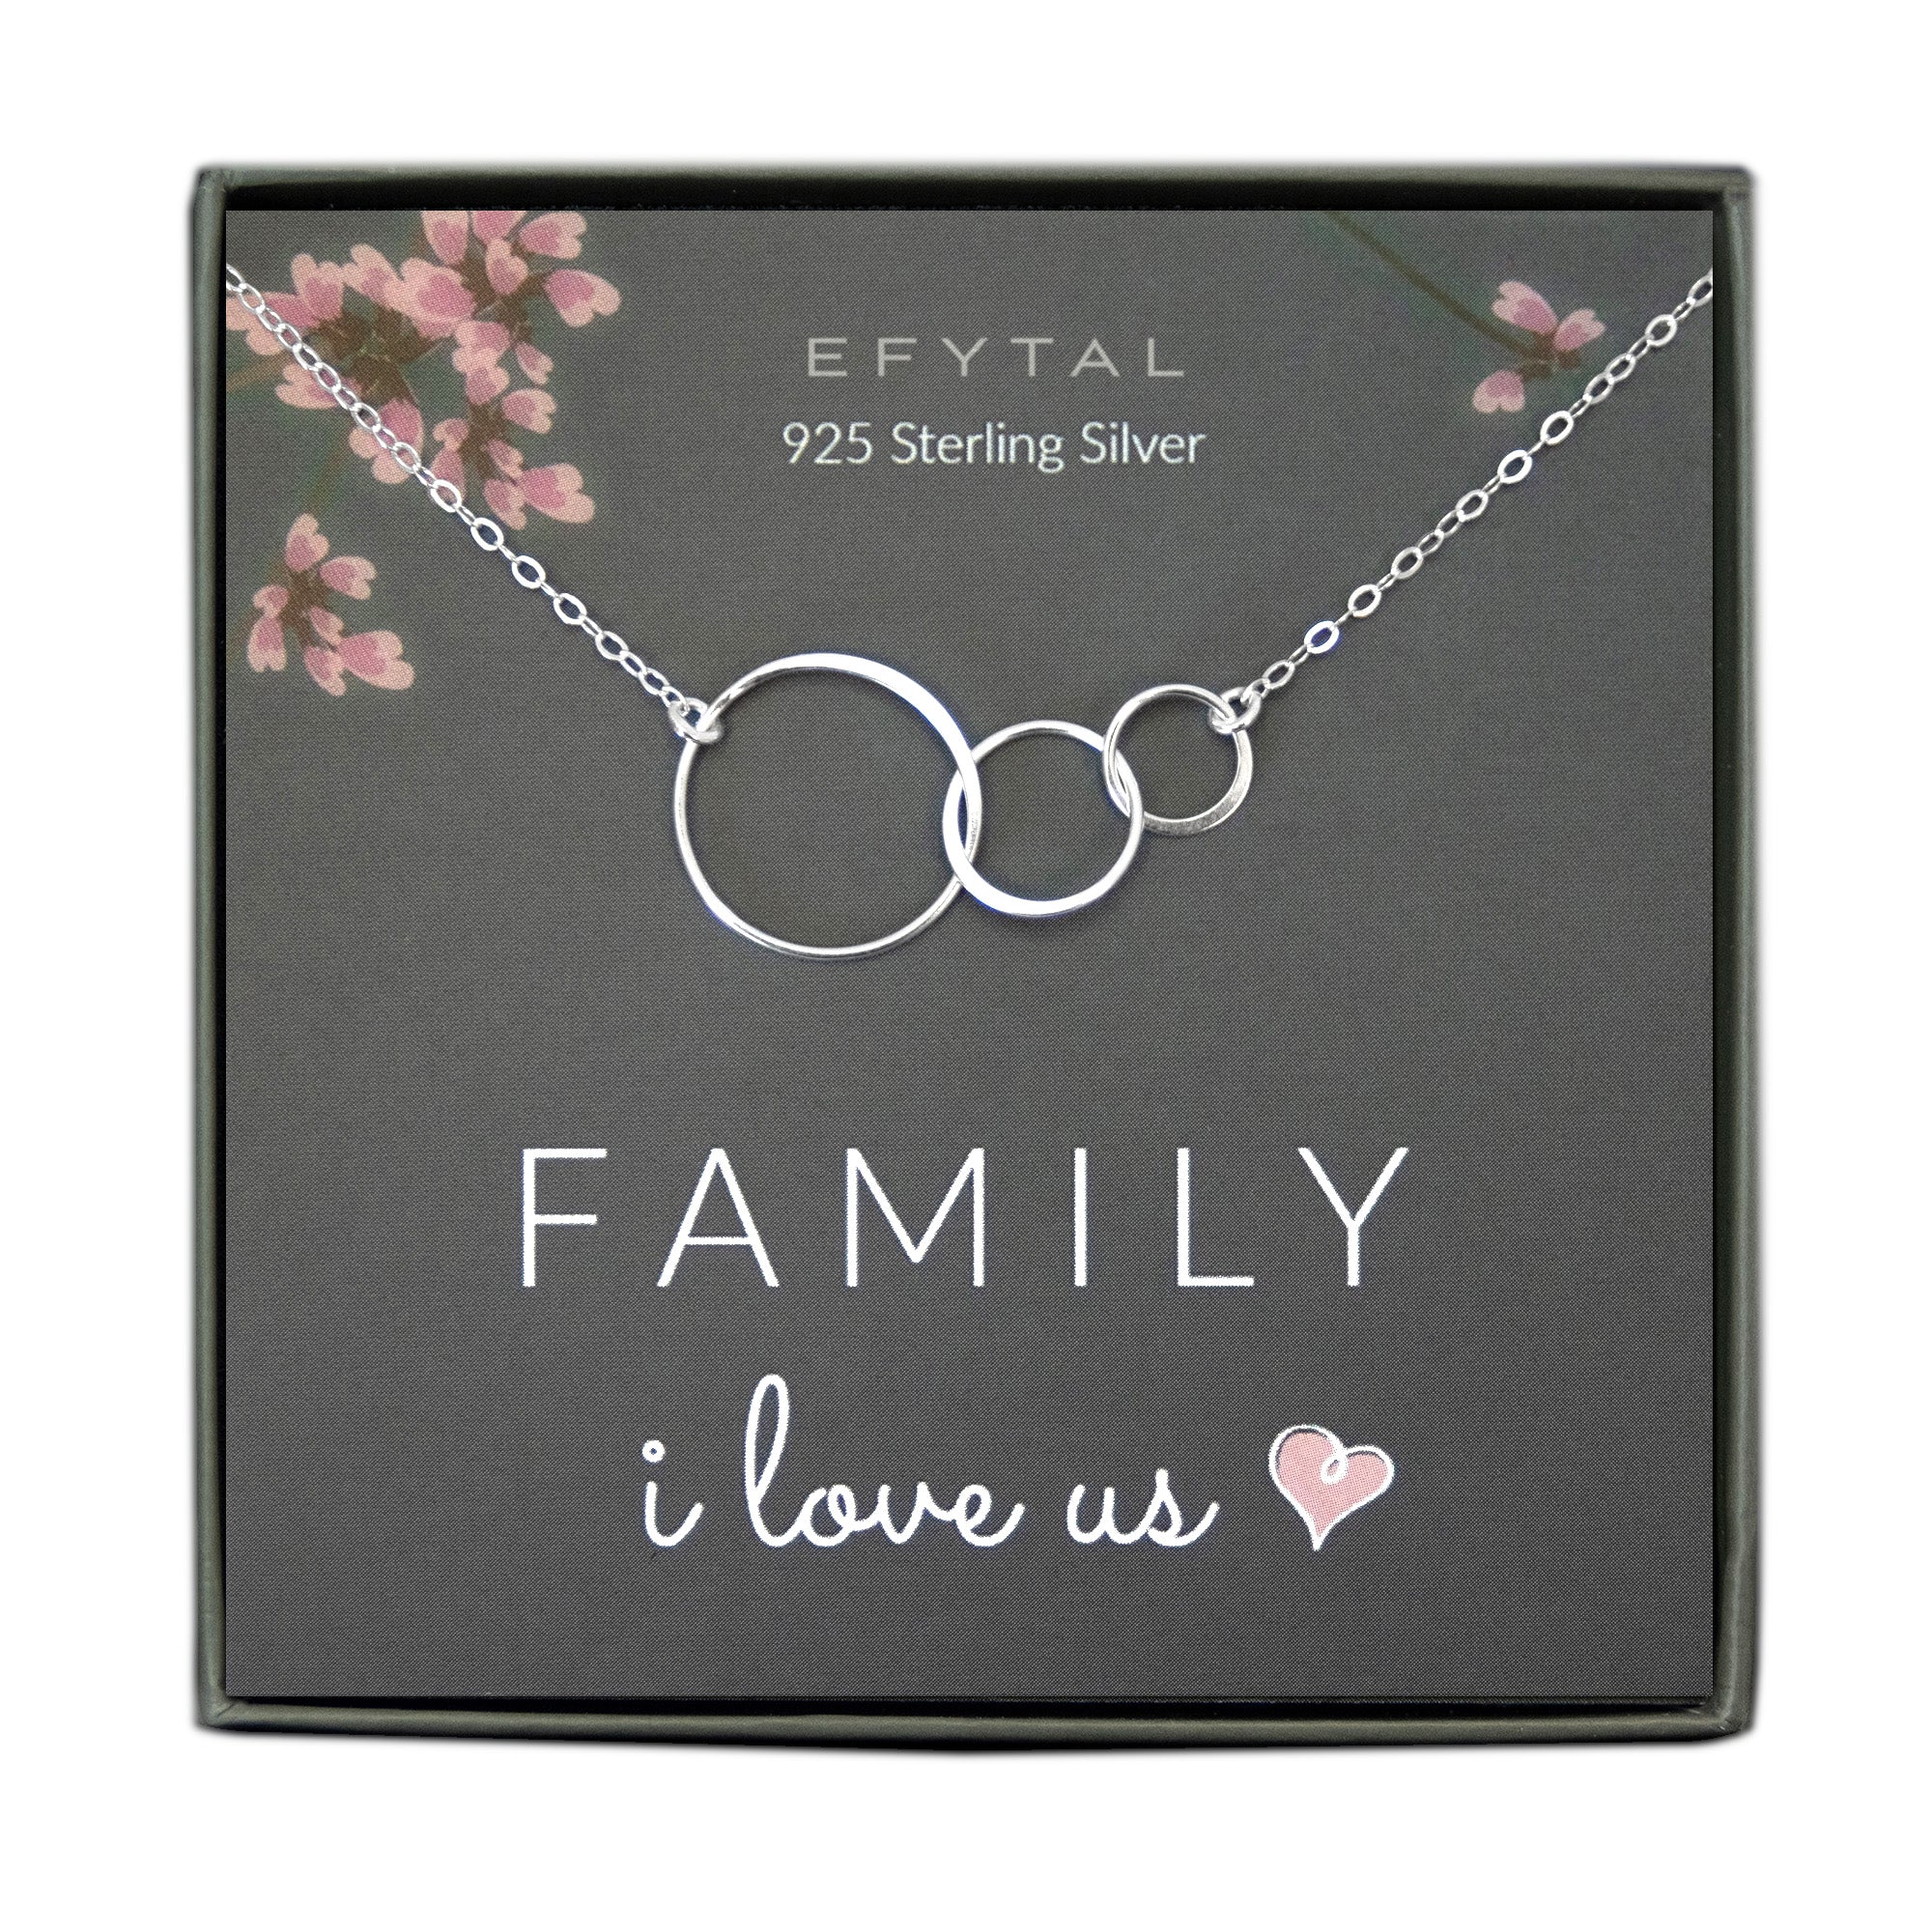 FREE Friends Related Jewelry Cards – Silver and Ivy